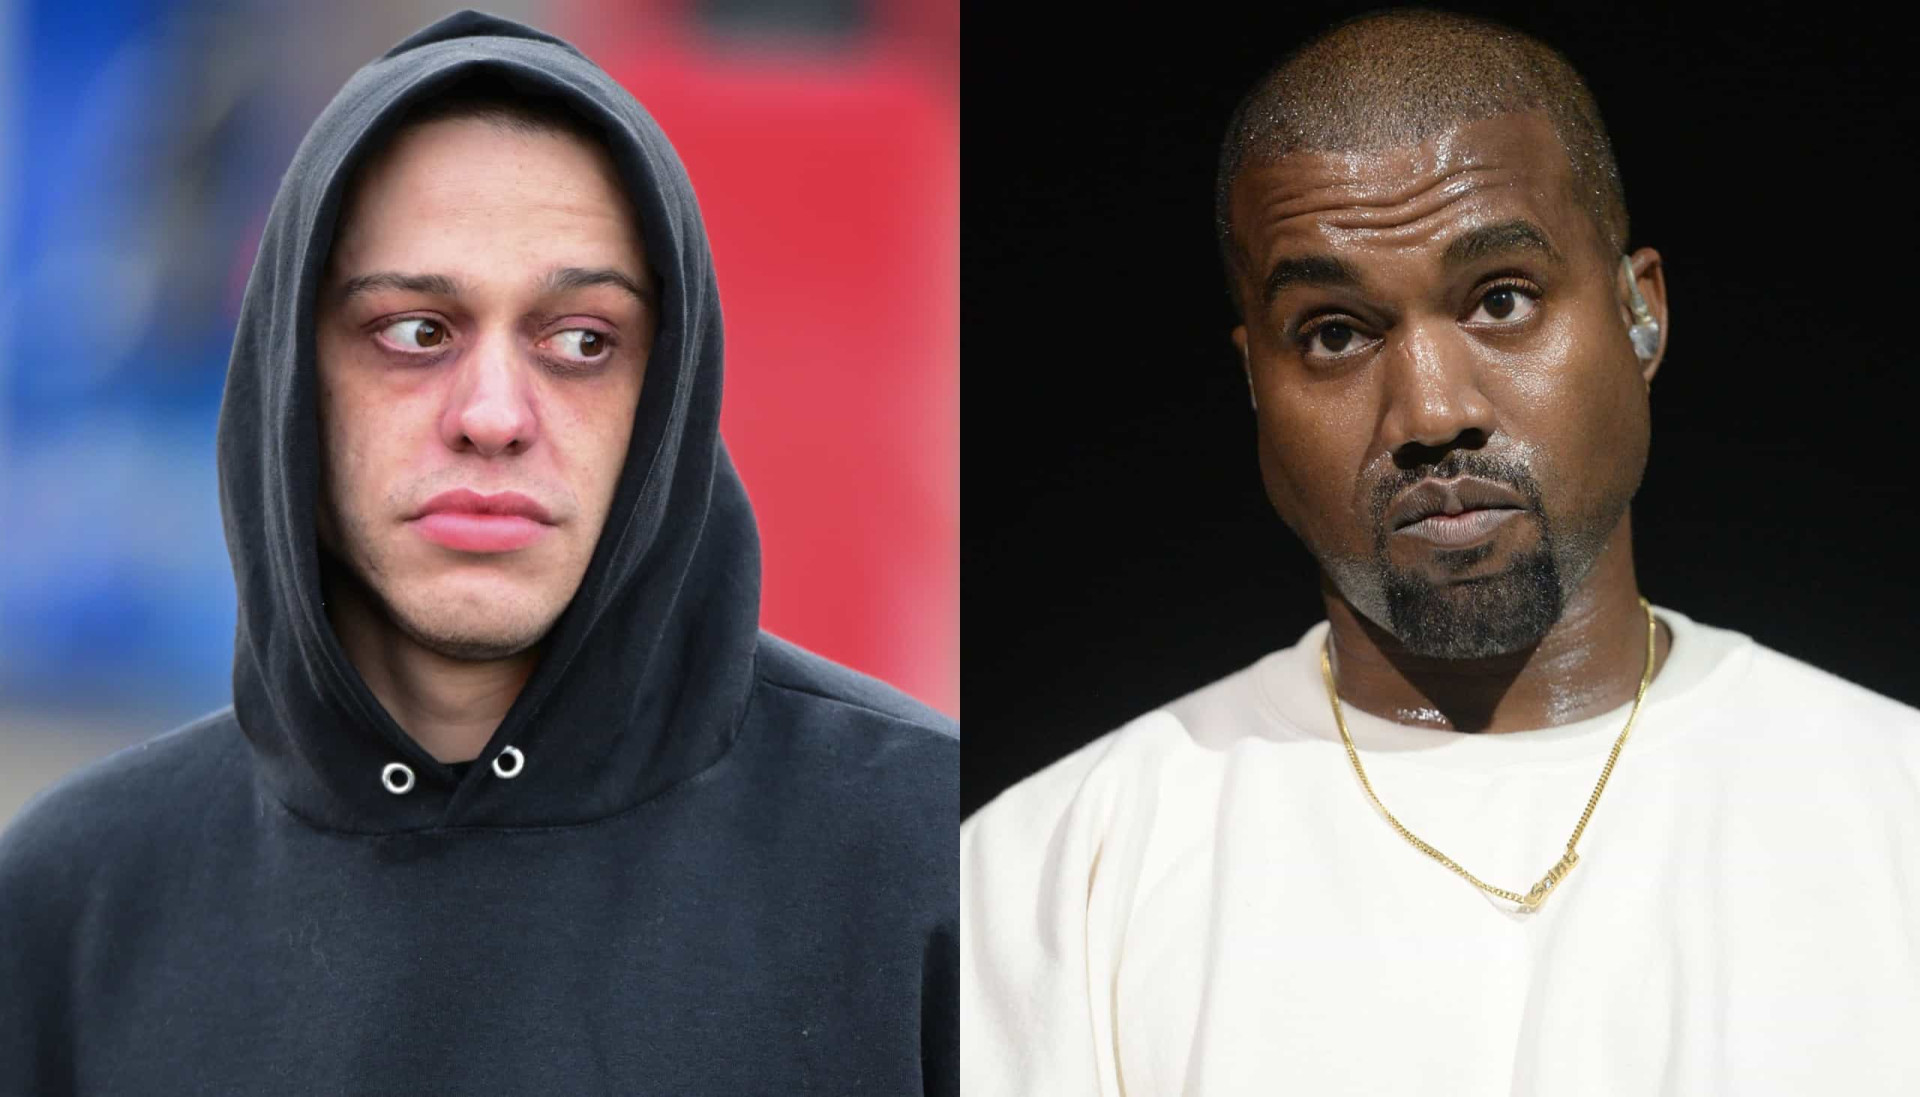 <p>Kanye "Ye" West engaged in a one-sided feud with Pete Davidson following news of a romantic connection between the comedian and his ex-wife, Kim Kardashian. West's anger persisted even after Davidson and Kardashian ended their relationship. The rapper took to Instagram to vent his frustration, sharing messages exchanged with Kardashian regarding their children, and making threatening remarks towards Davidson. One of West's posts stated, "ask Pete how those tattoos of my kids doing in the trauma unit." Davidson had developed a close bond with Kardashian's children and had their initials tattooed on his neck. These posts were ultimately removed, allegedly because Kardashian was greatly displeased with West reverting to his previous behavior.</p><p><a href="https://www.msn.com/en-us/community/channel/vid-7xx8mnucu55yw63we9va2gwr7uihbxwc68fxqp25x6tg4ftibpra?cvid=94631541bc0f4f89bfd59158d696ad7e">Follow us and access great exclusive content every day</a></p>